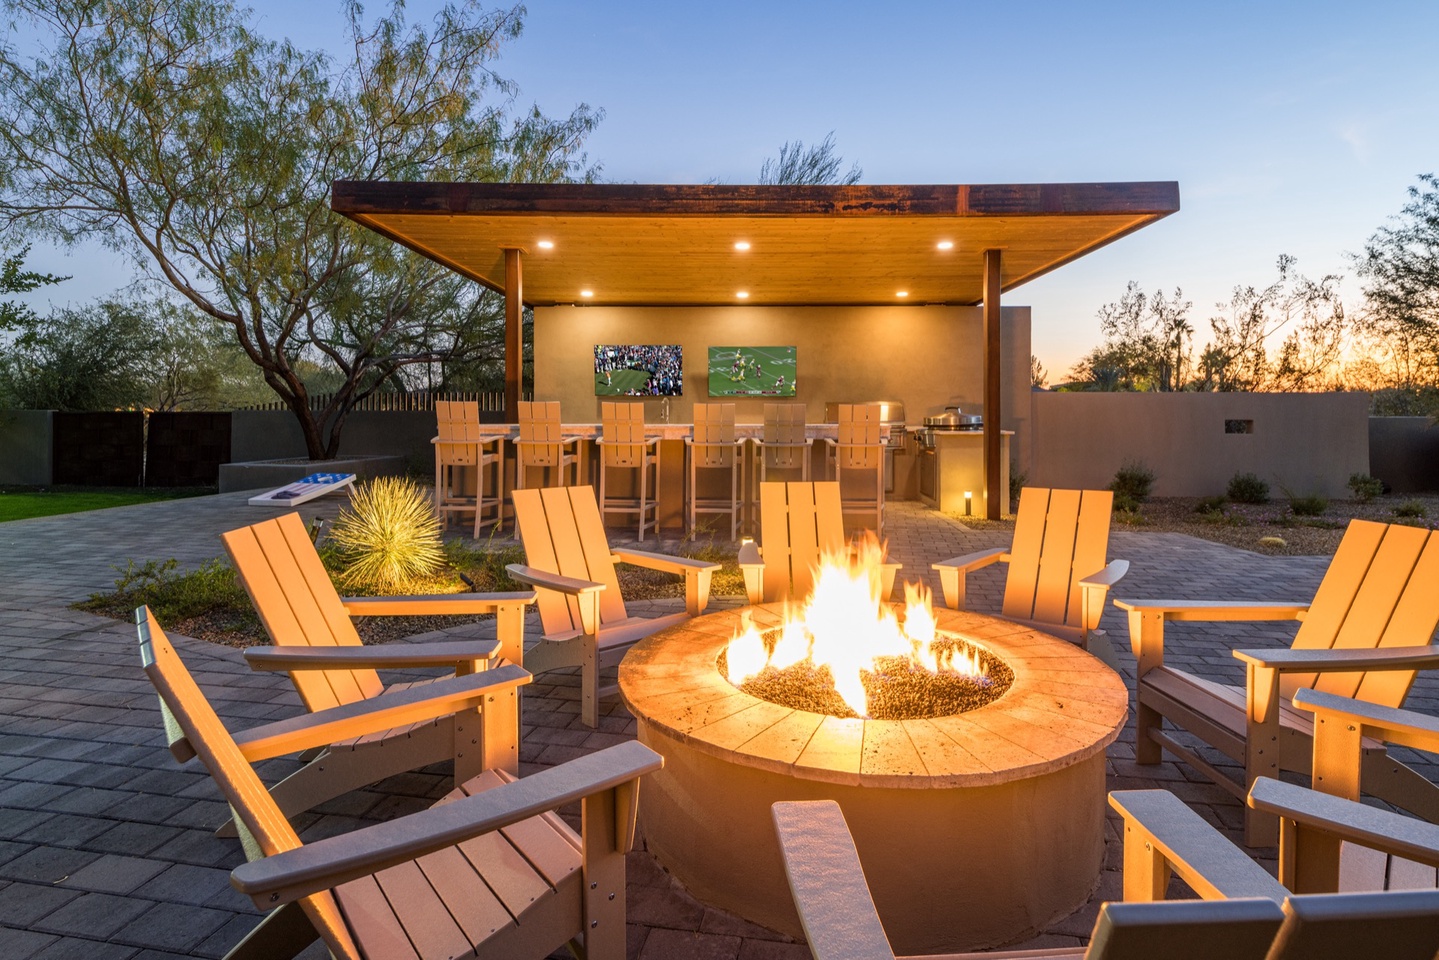 Take advantage of the multiple fire pits around the home